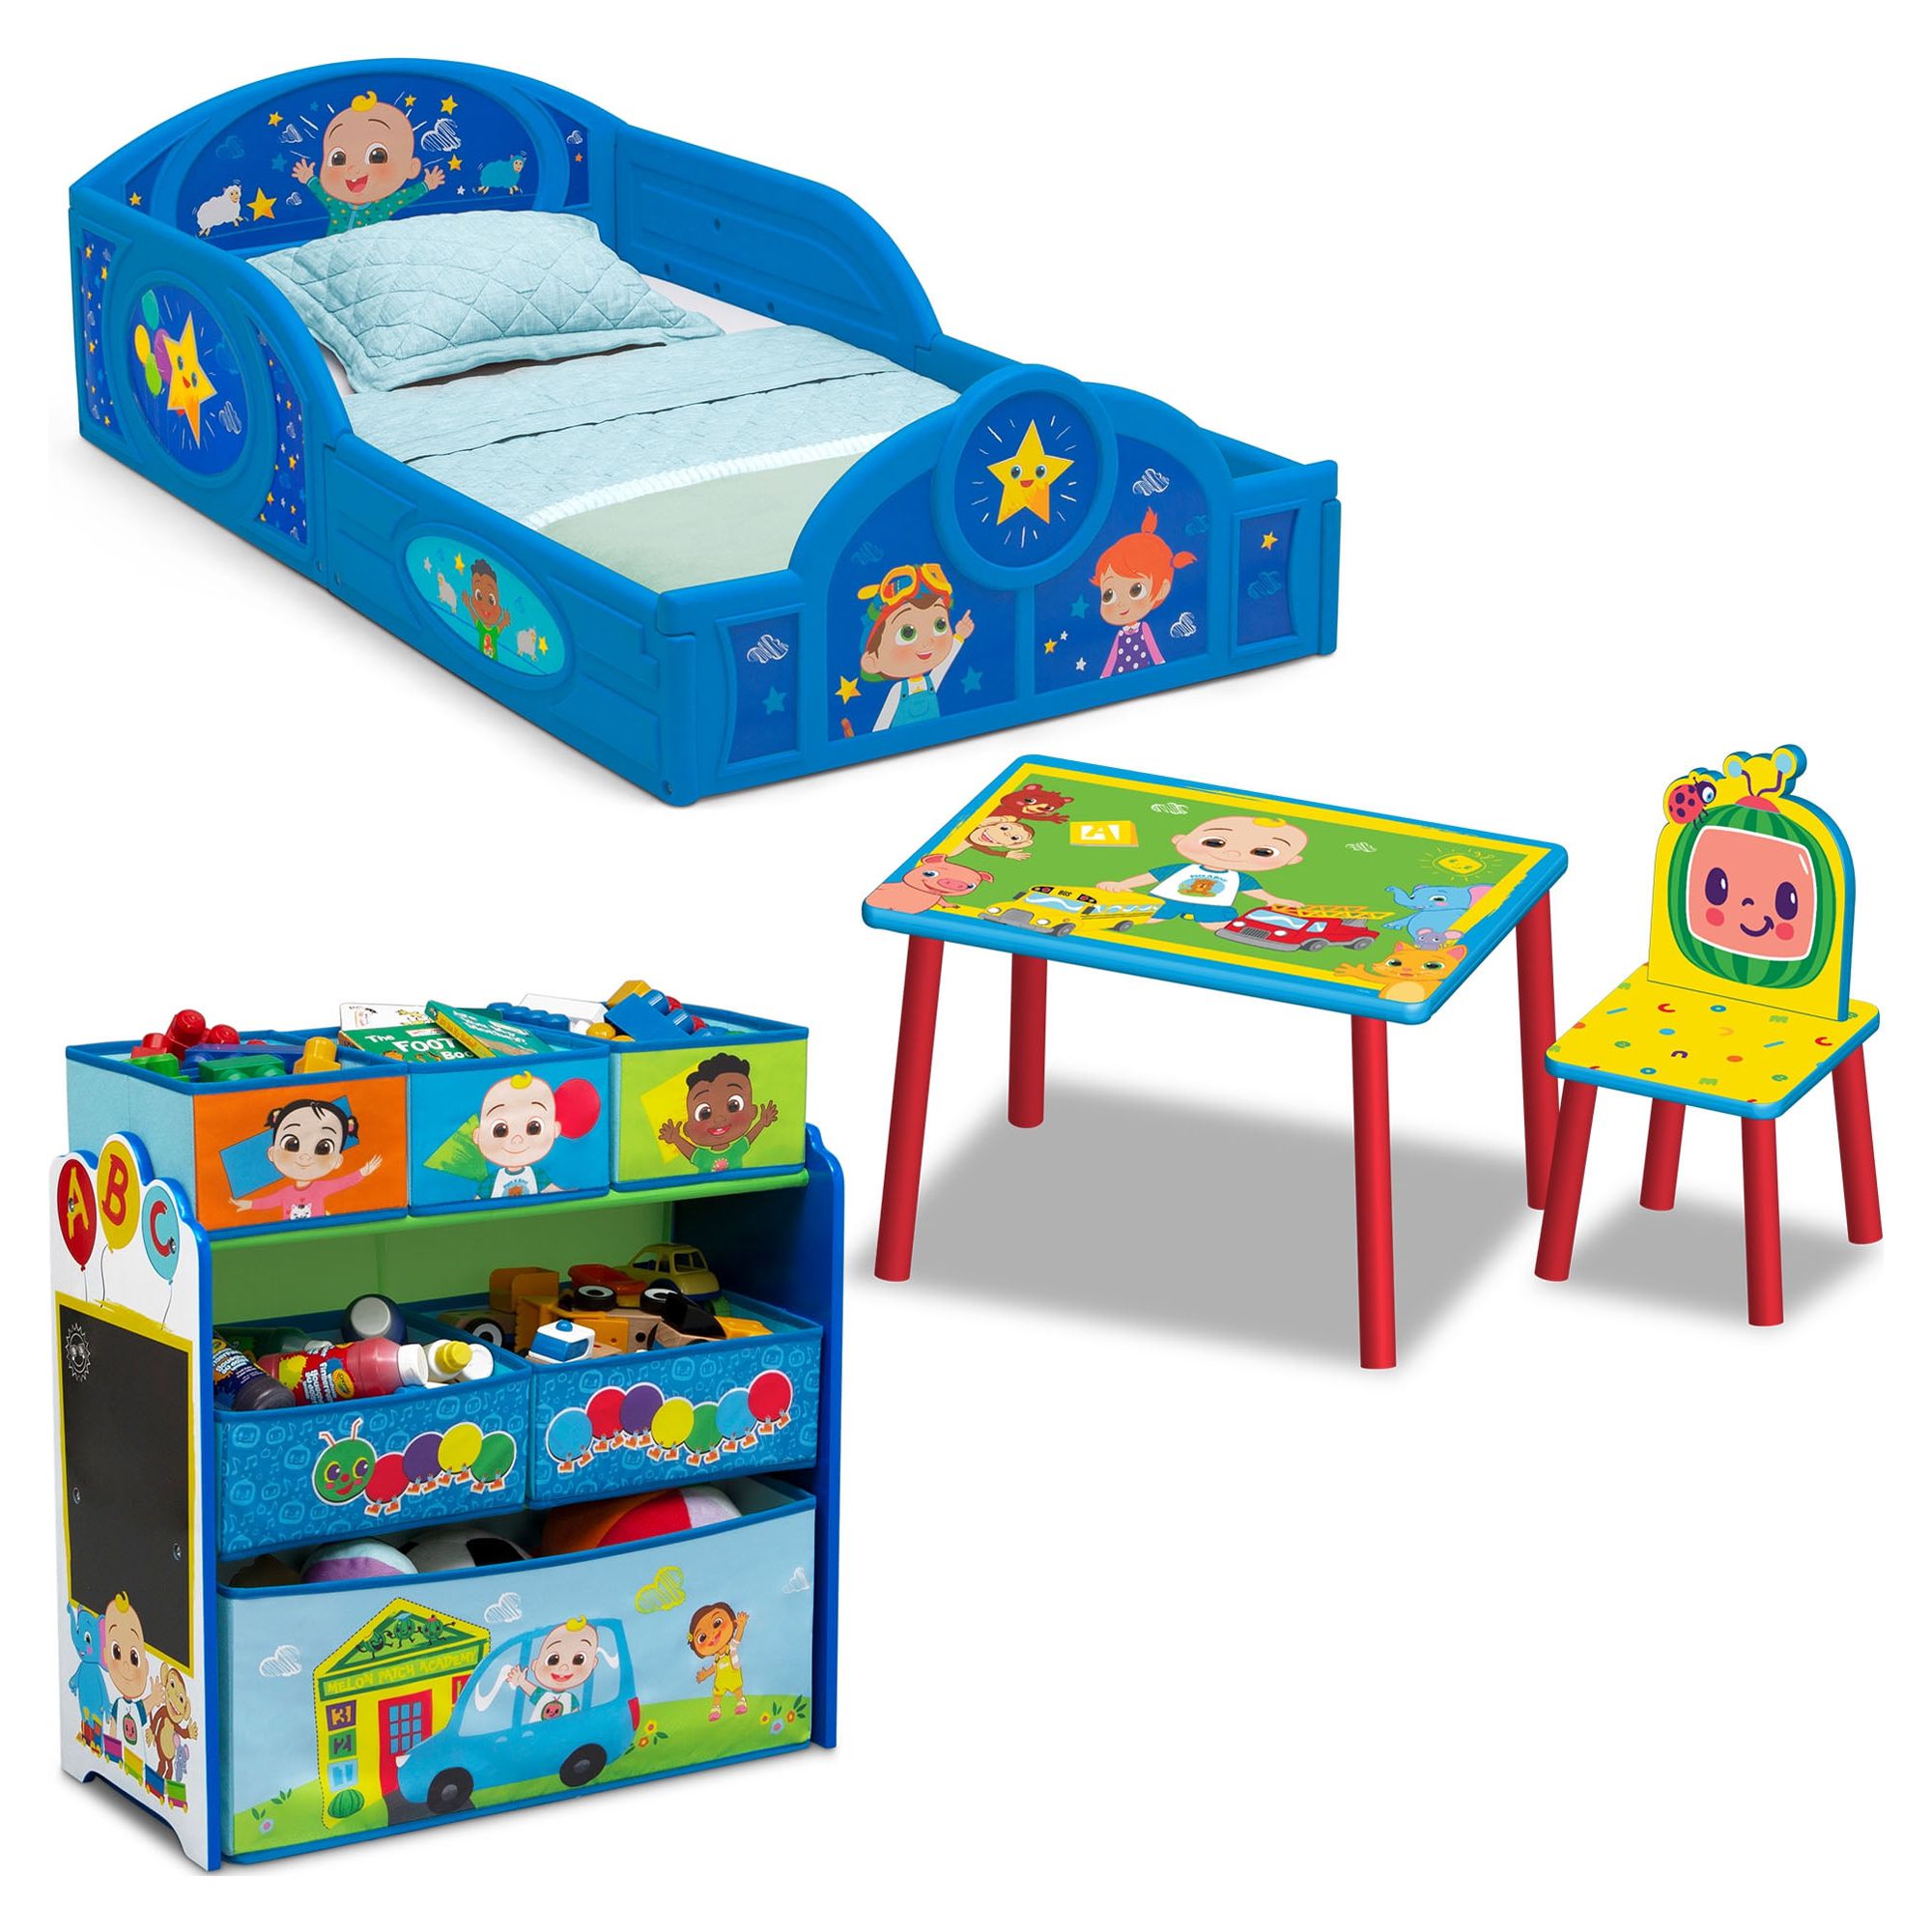 CoComelon 4-Piece Room-in-a-Box Bedroom Set by Delta Children - image 1 of 20